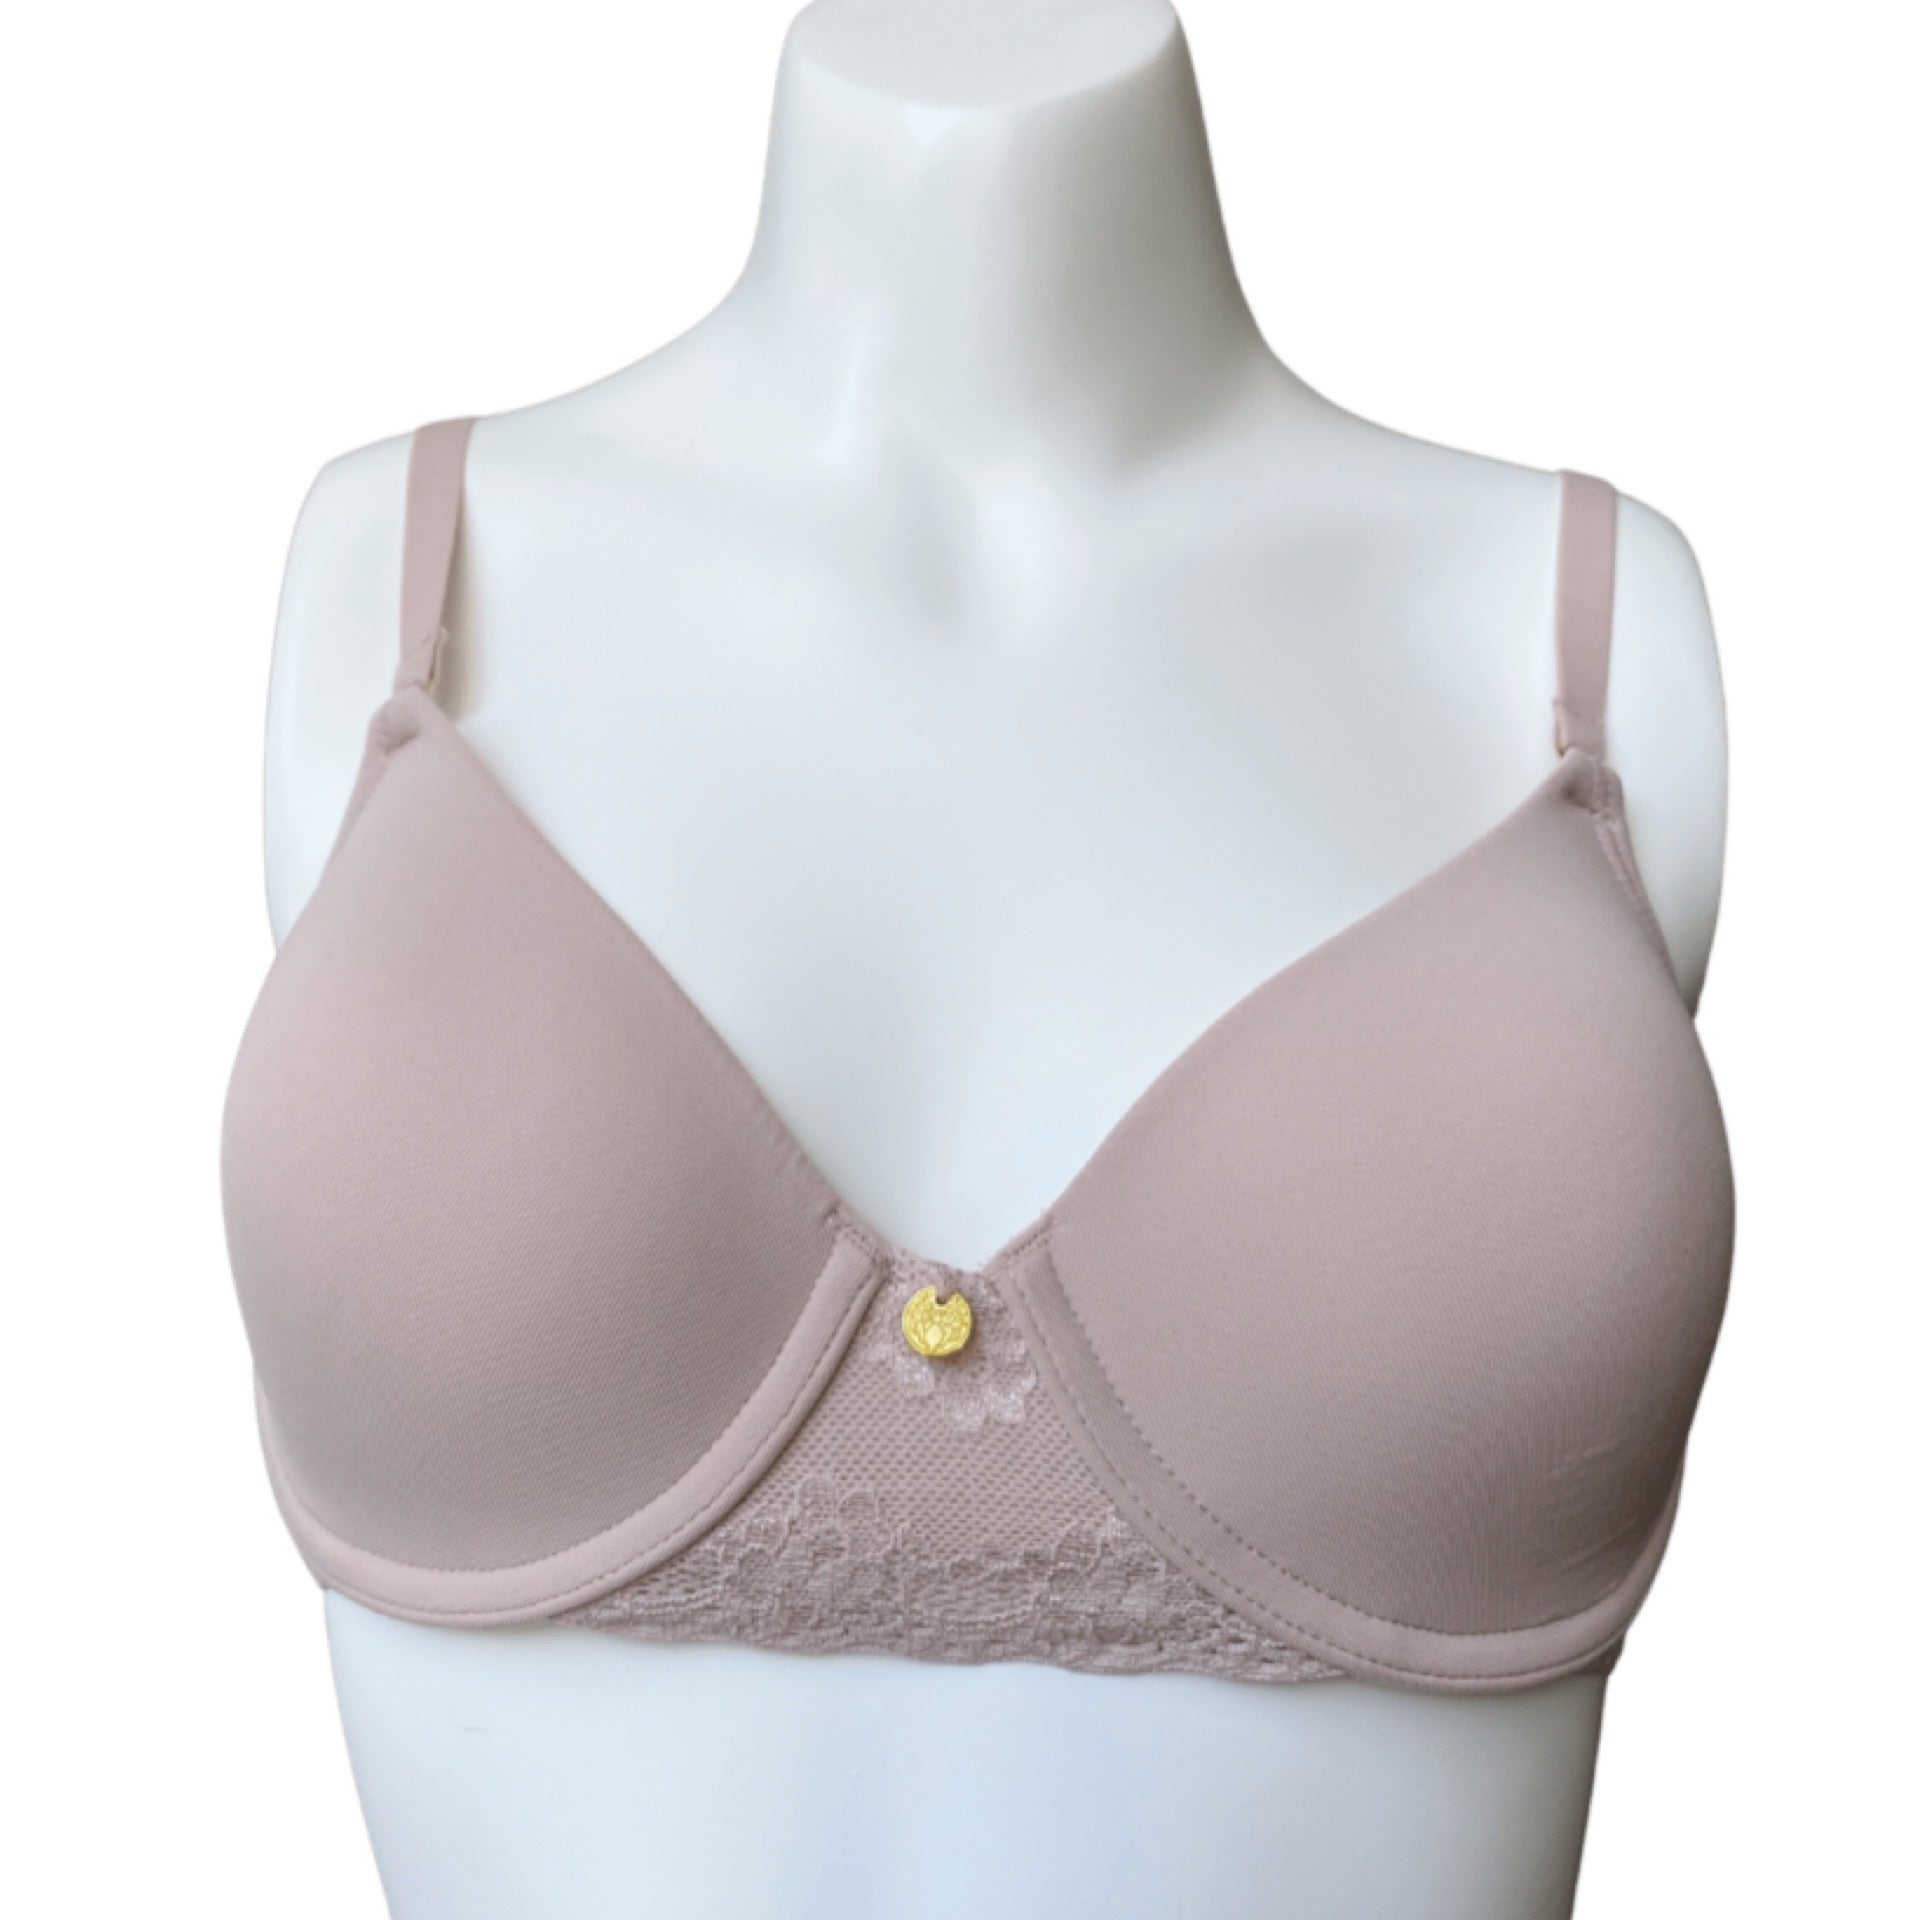 Natori Bliss Perfection Contour Soft Cup Bra - Red